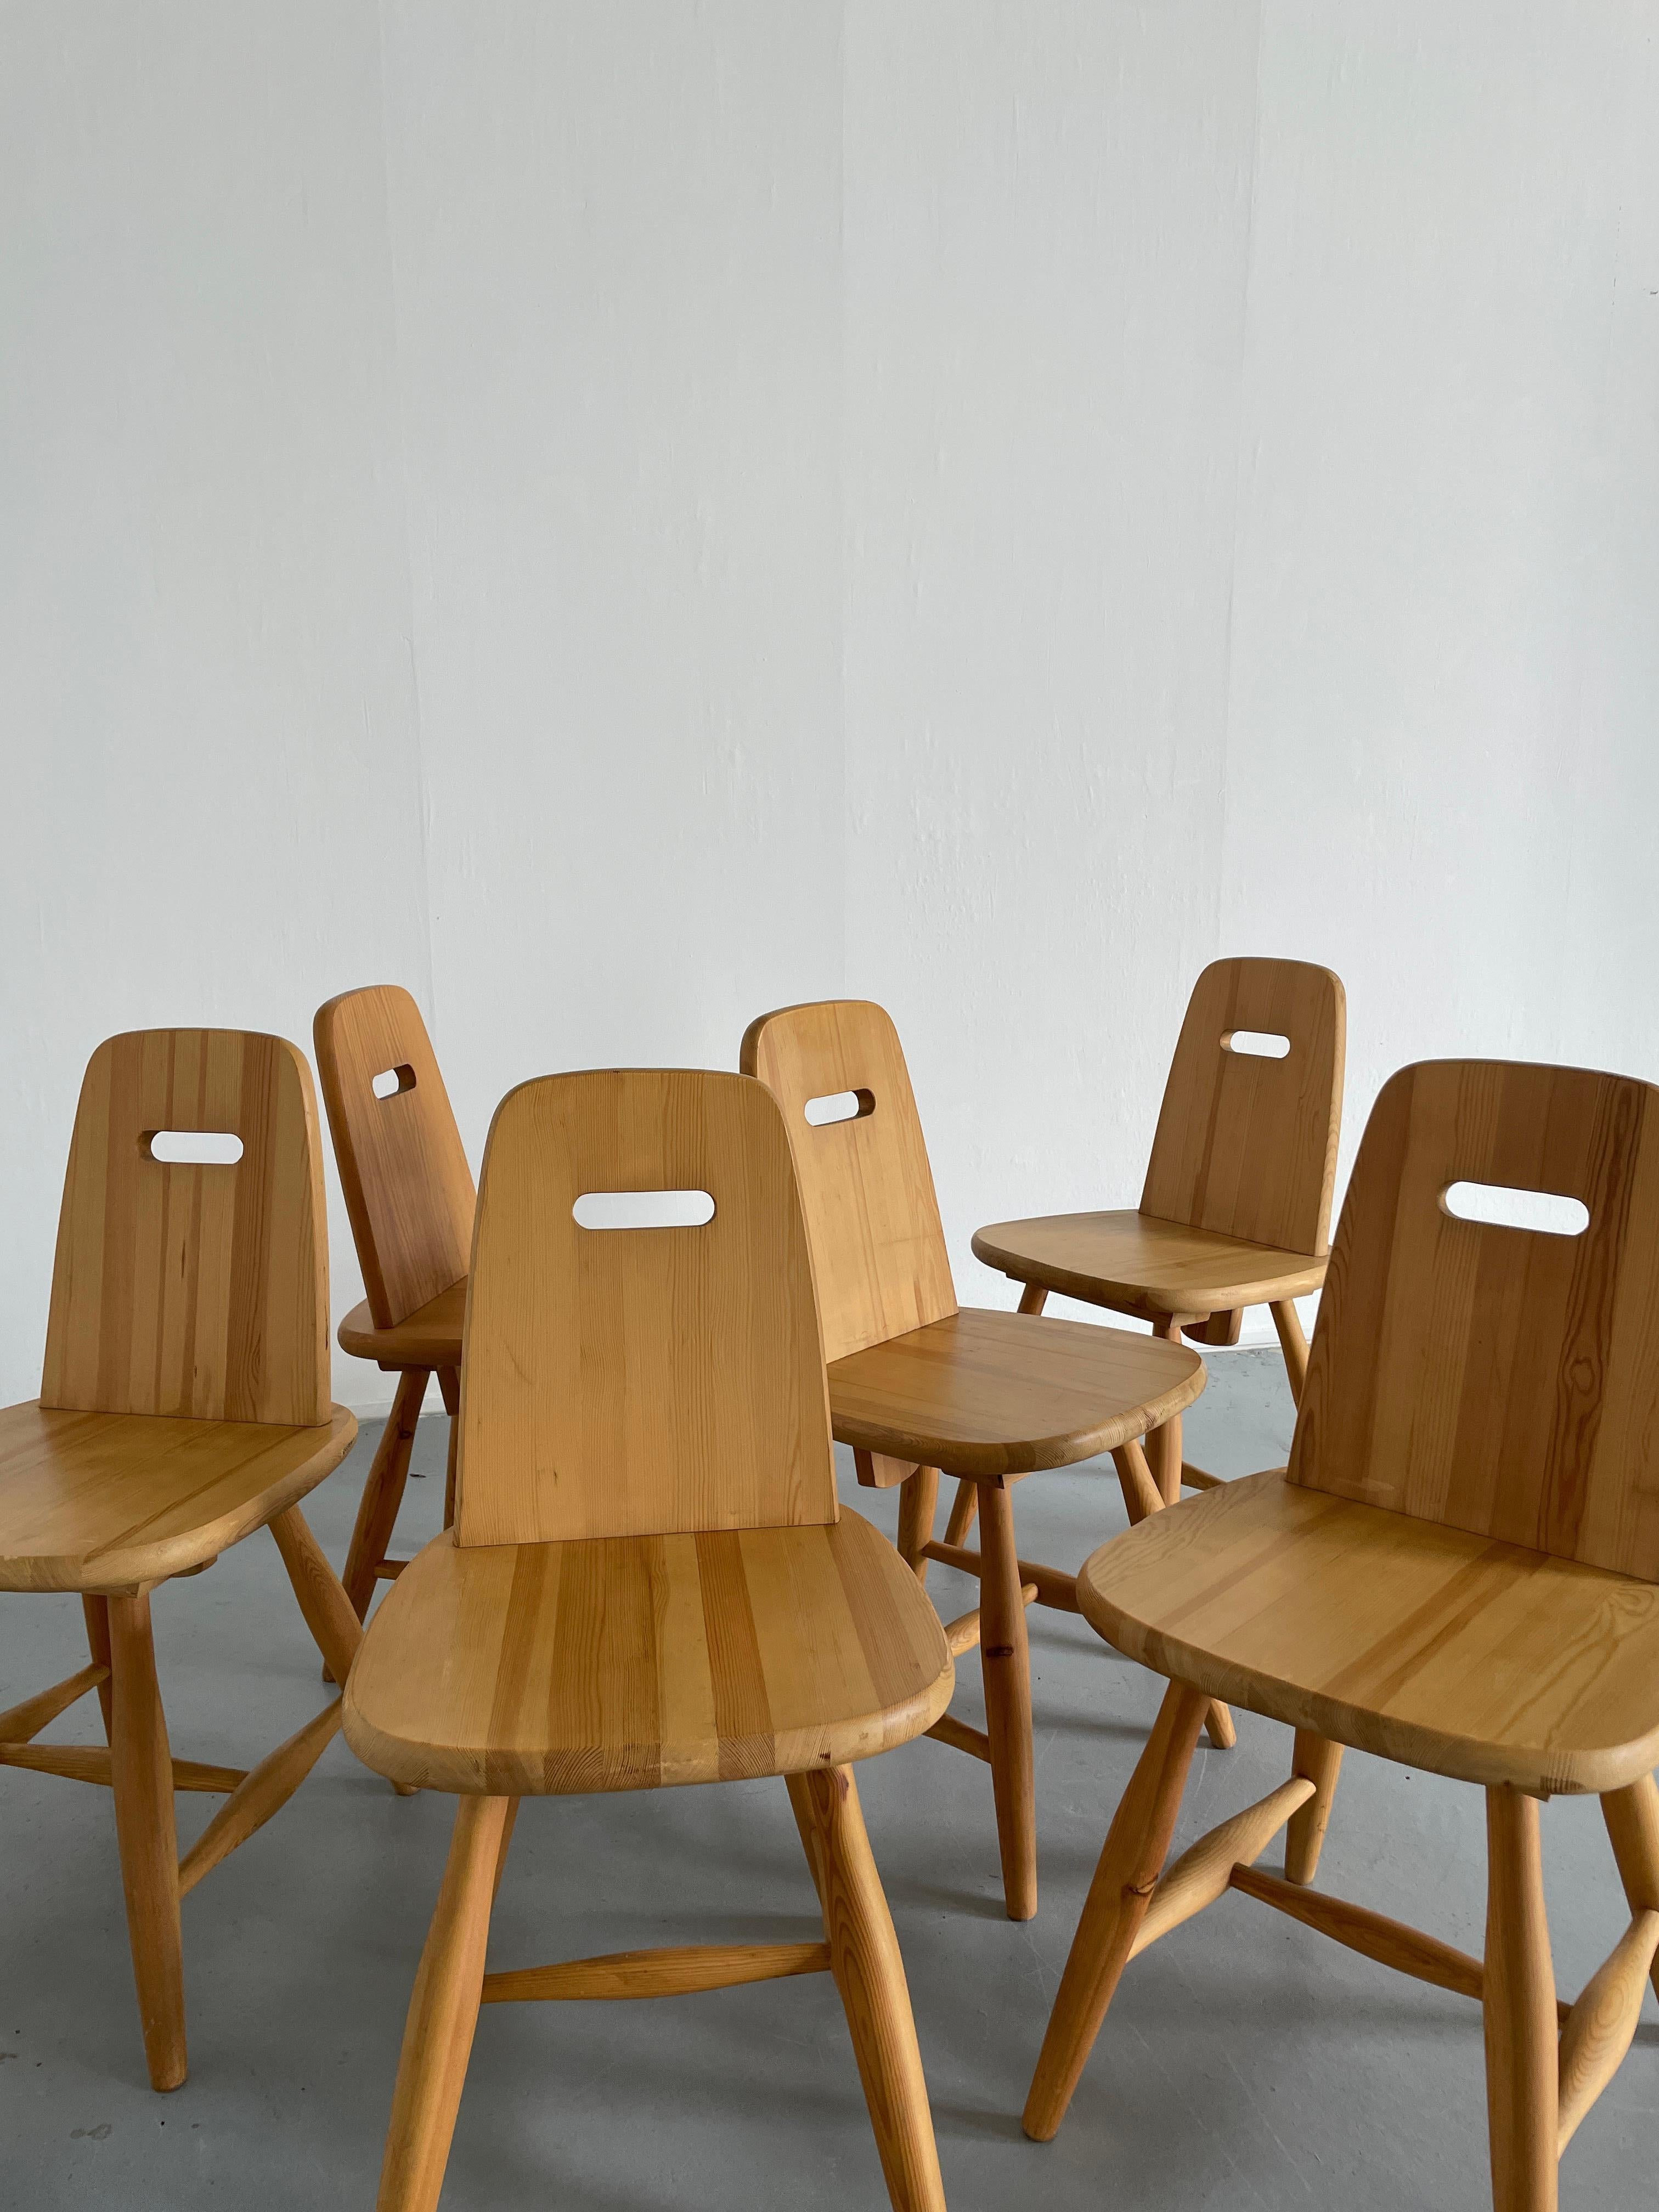 Finnish Set of 6 Eero Aarnio 'Pirtti' Wooden Dining Chairs in Solid Pine for Laukaan Puu